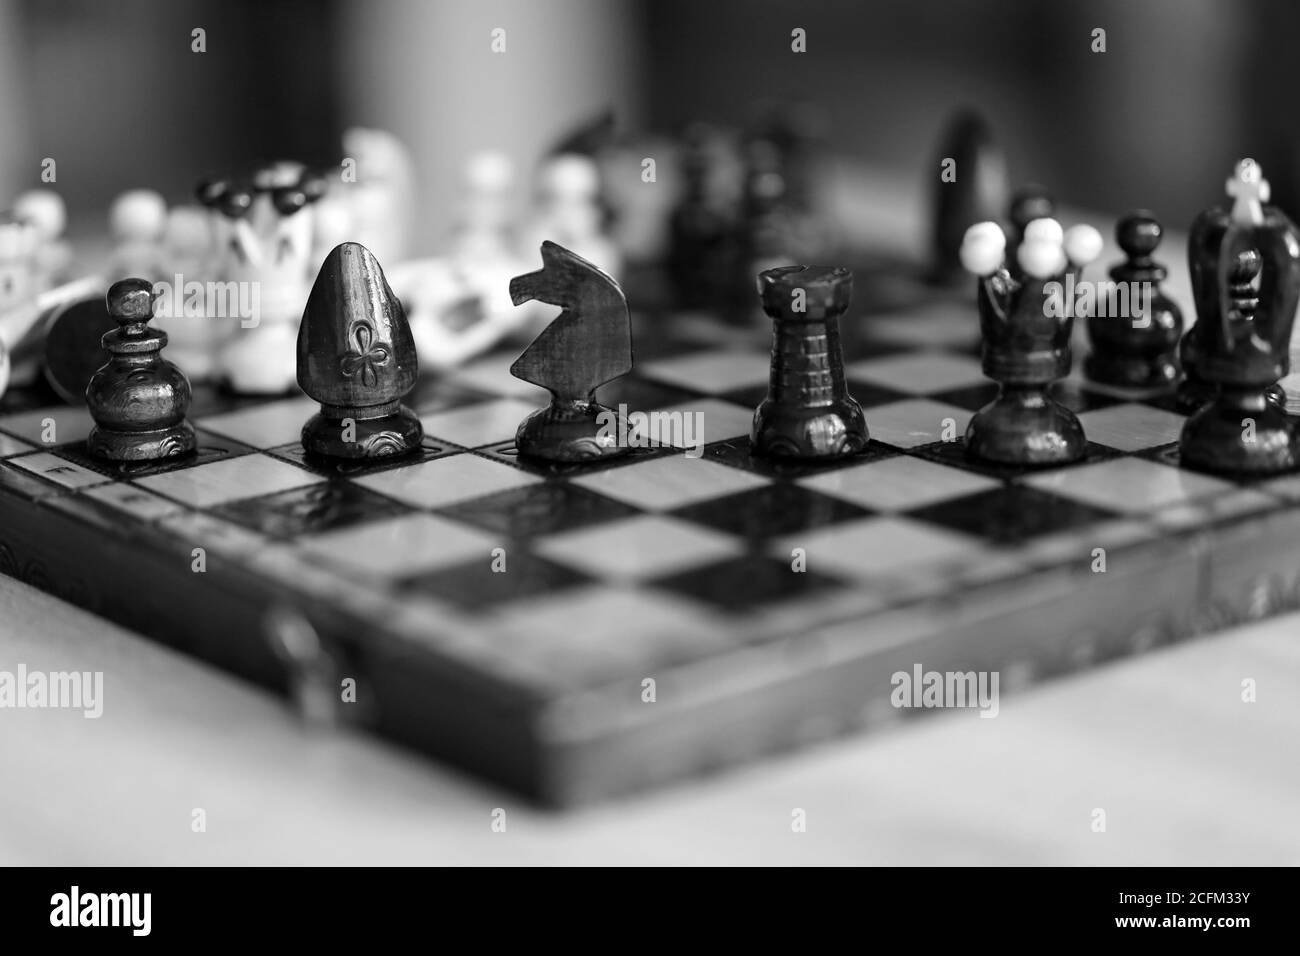 Chess pieces on wooden game board black and white color. Pieces include the pawn, king, queen, bishop, knight, and rook. Stock Photo